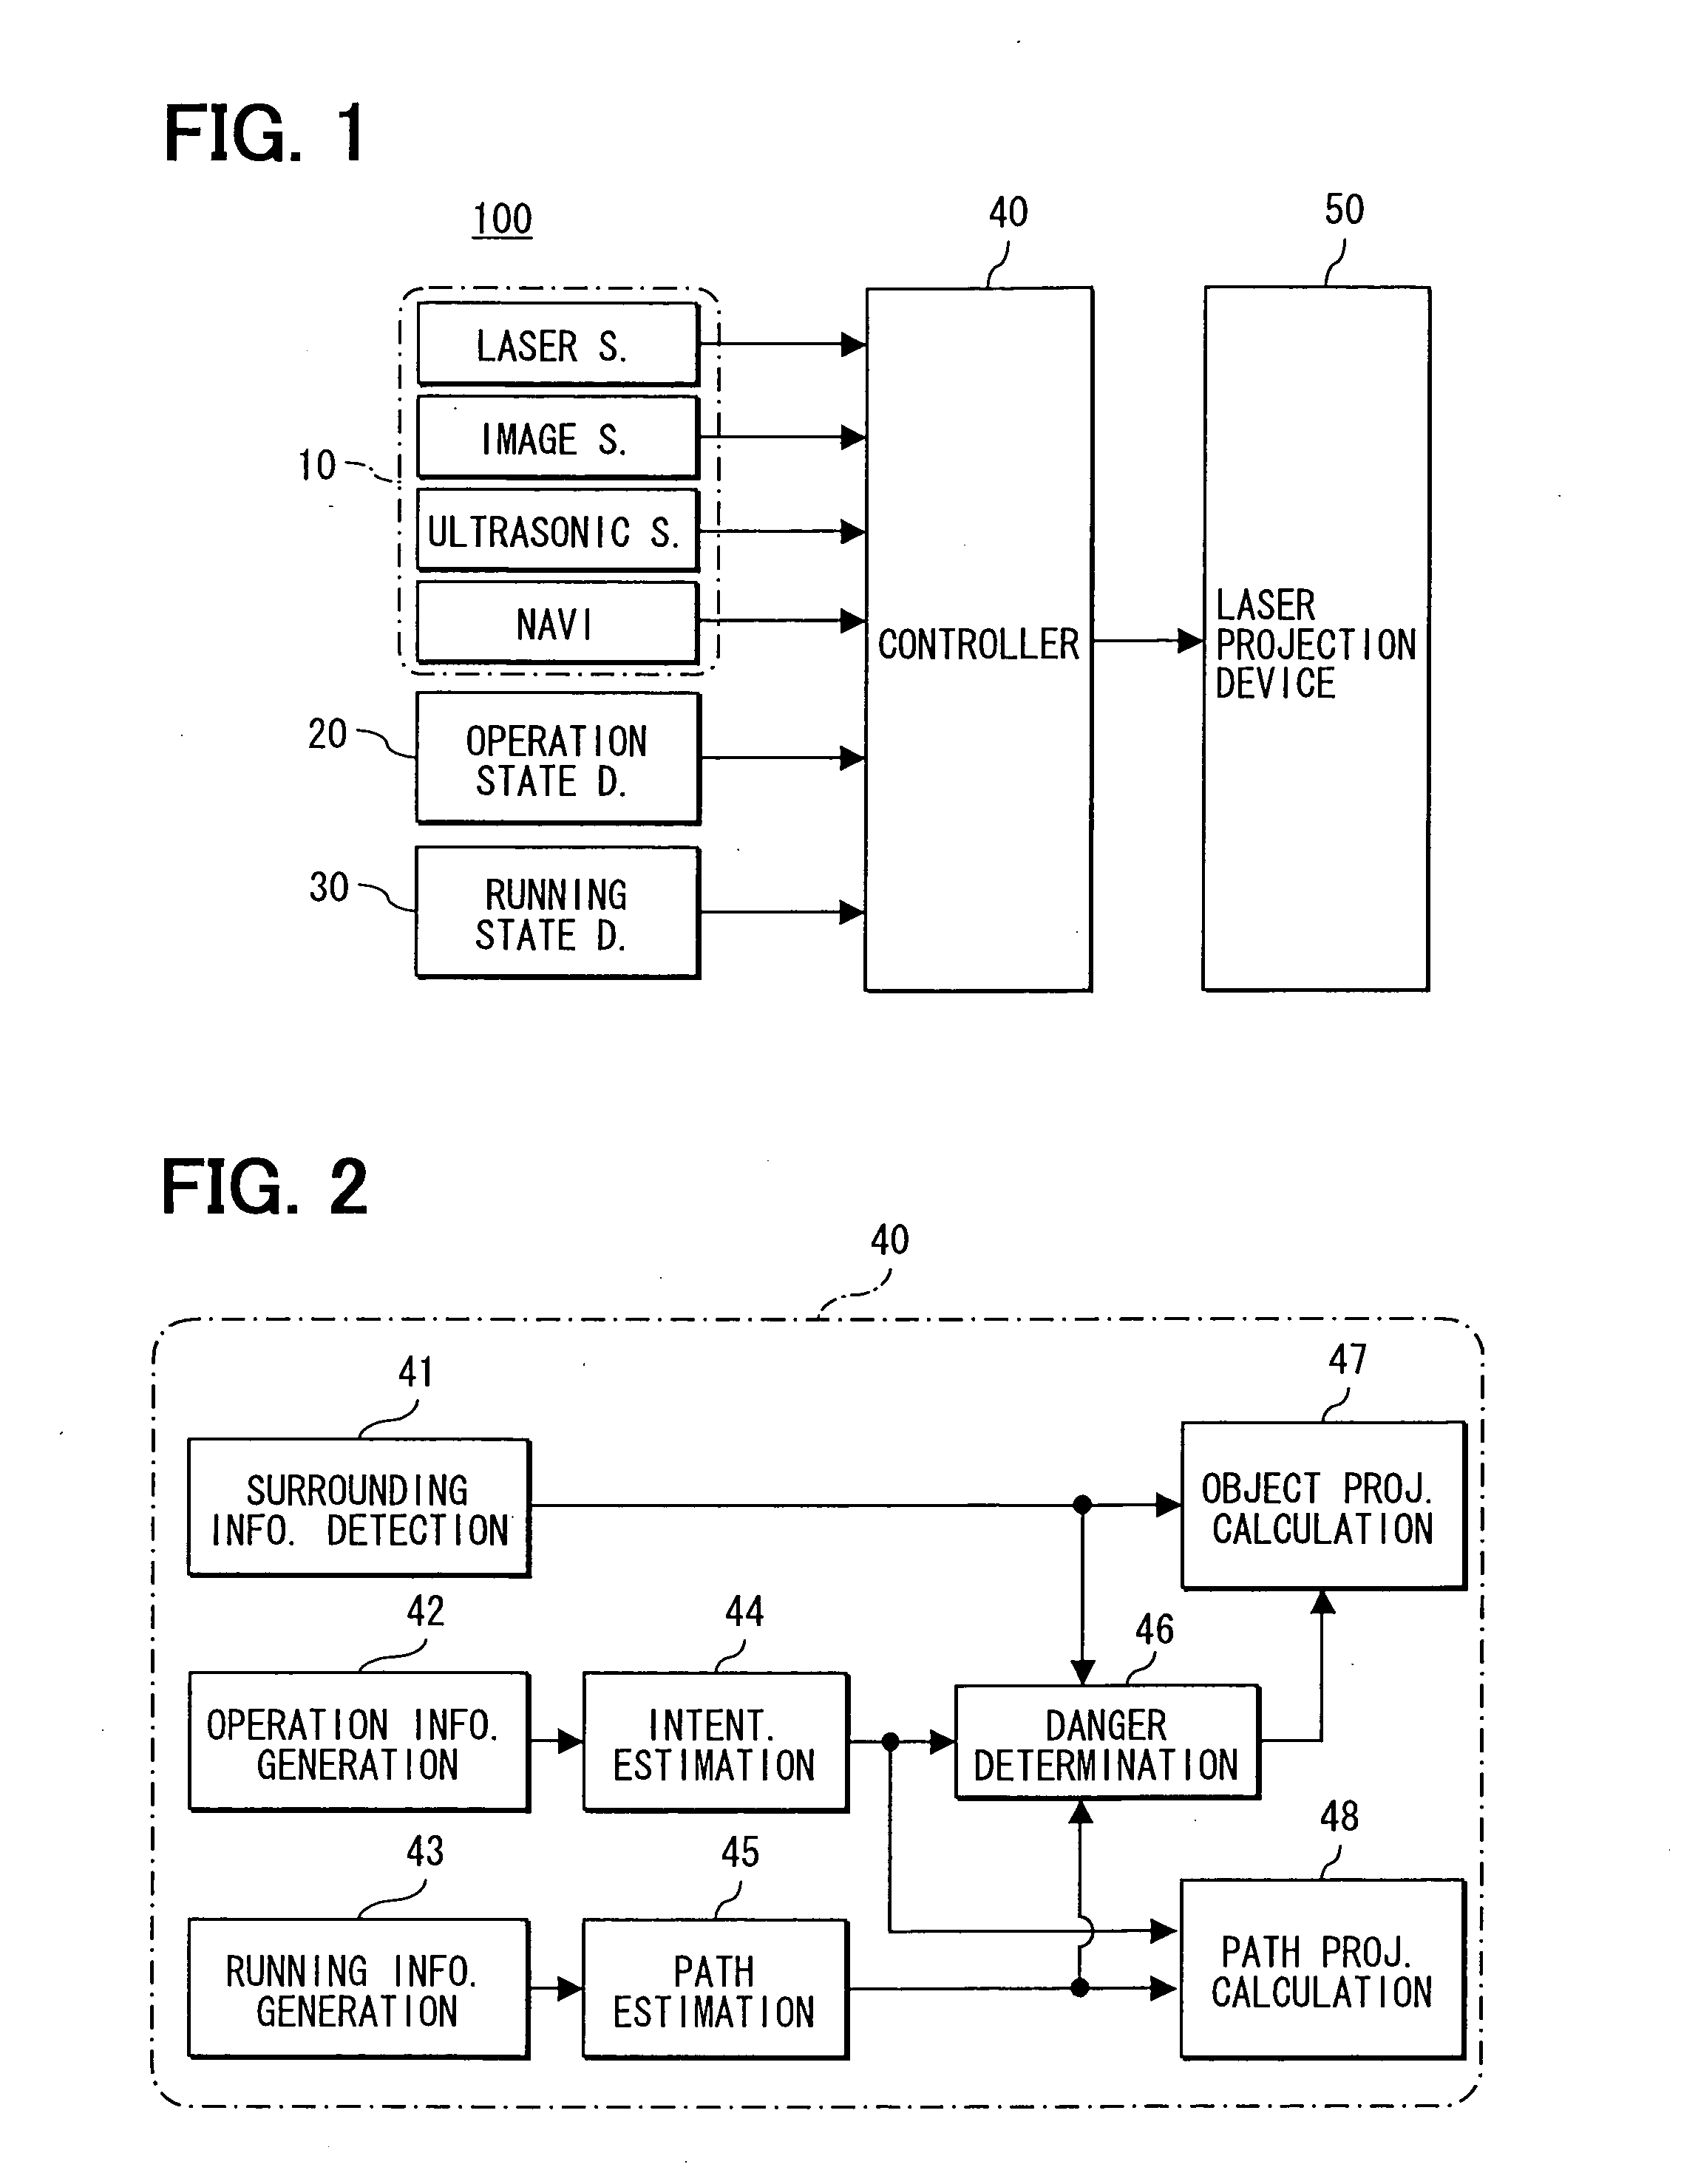 Information providing device for vehicle